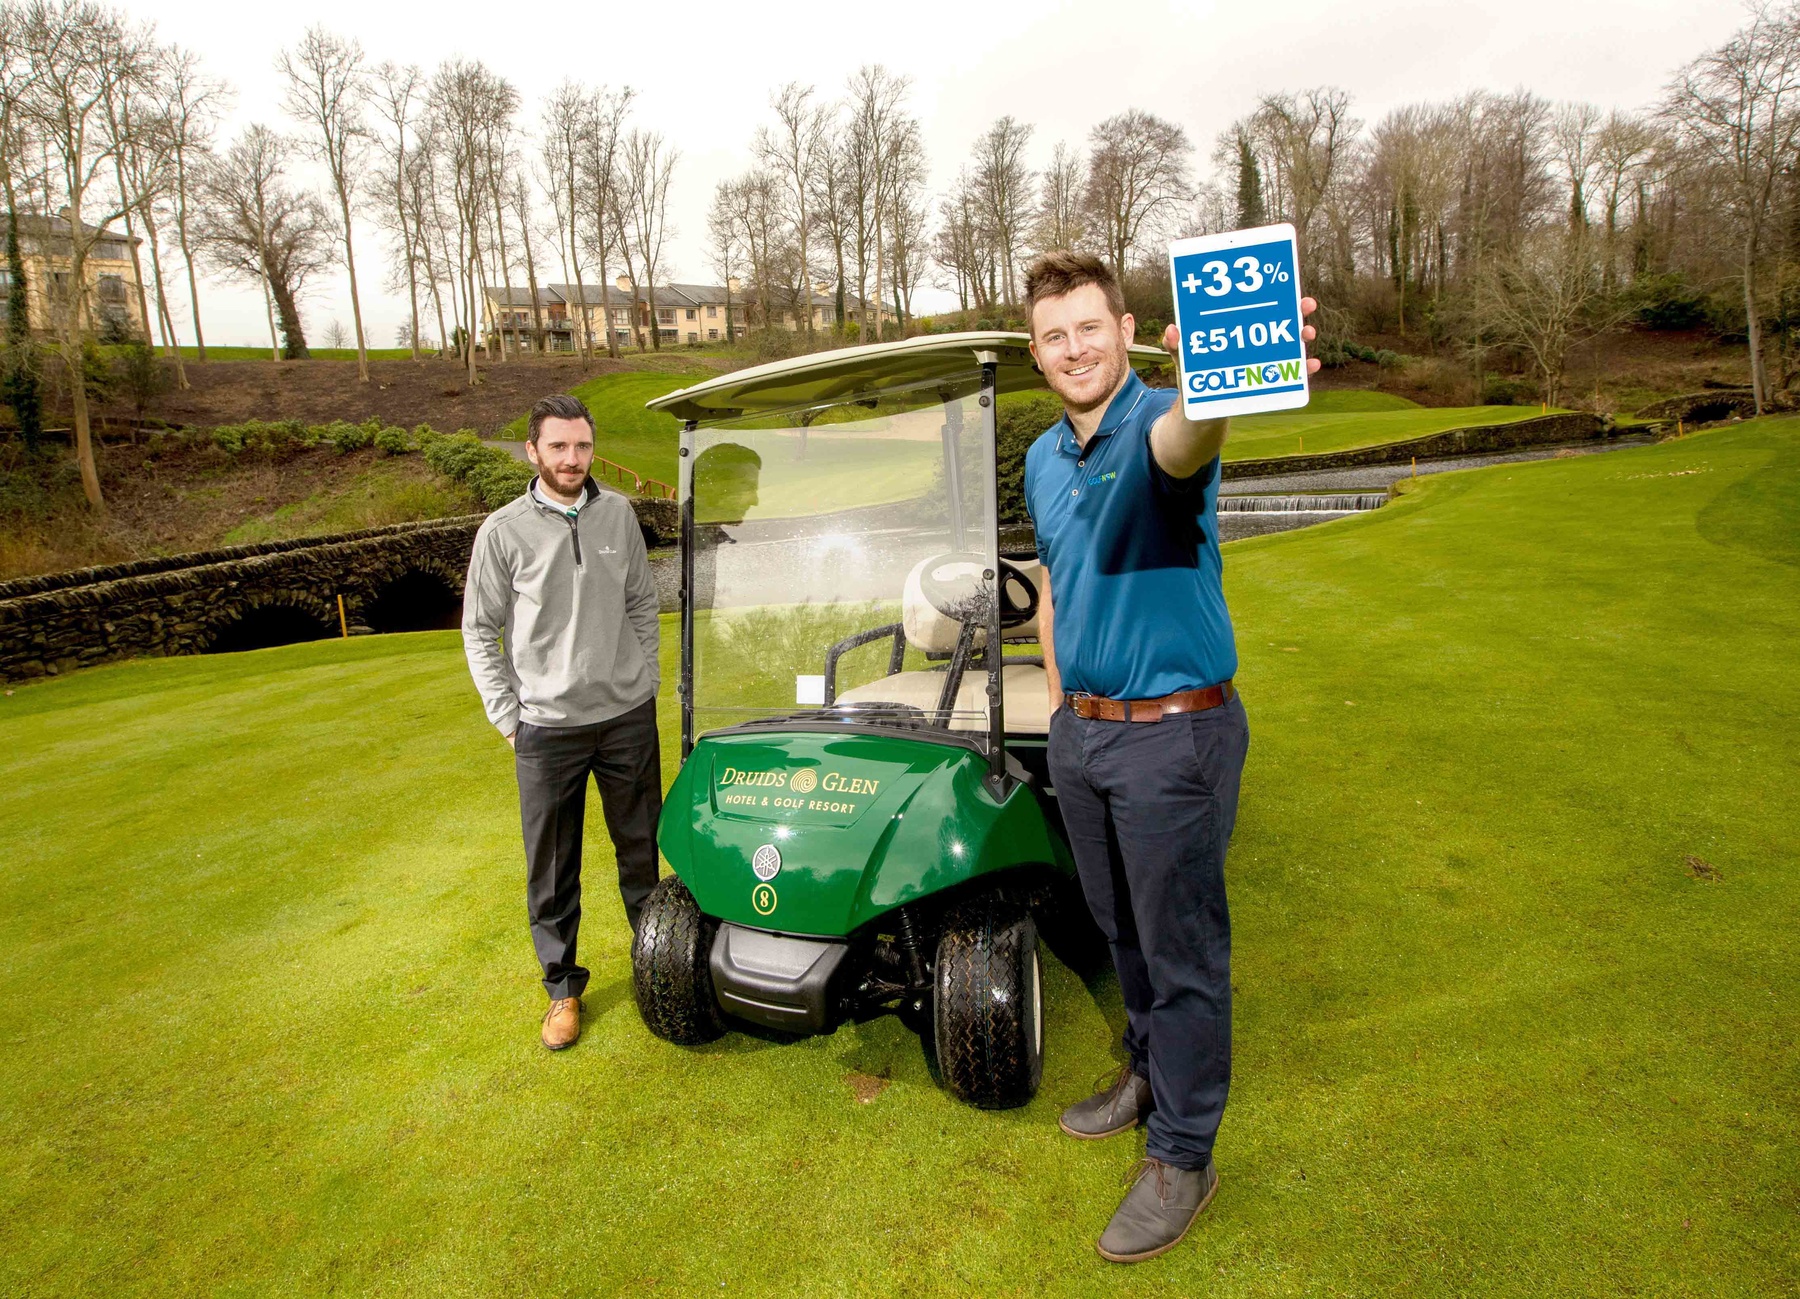 GolfNow tees up 33% growth #2